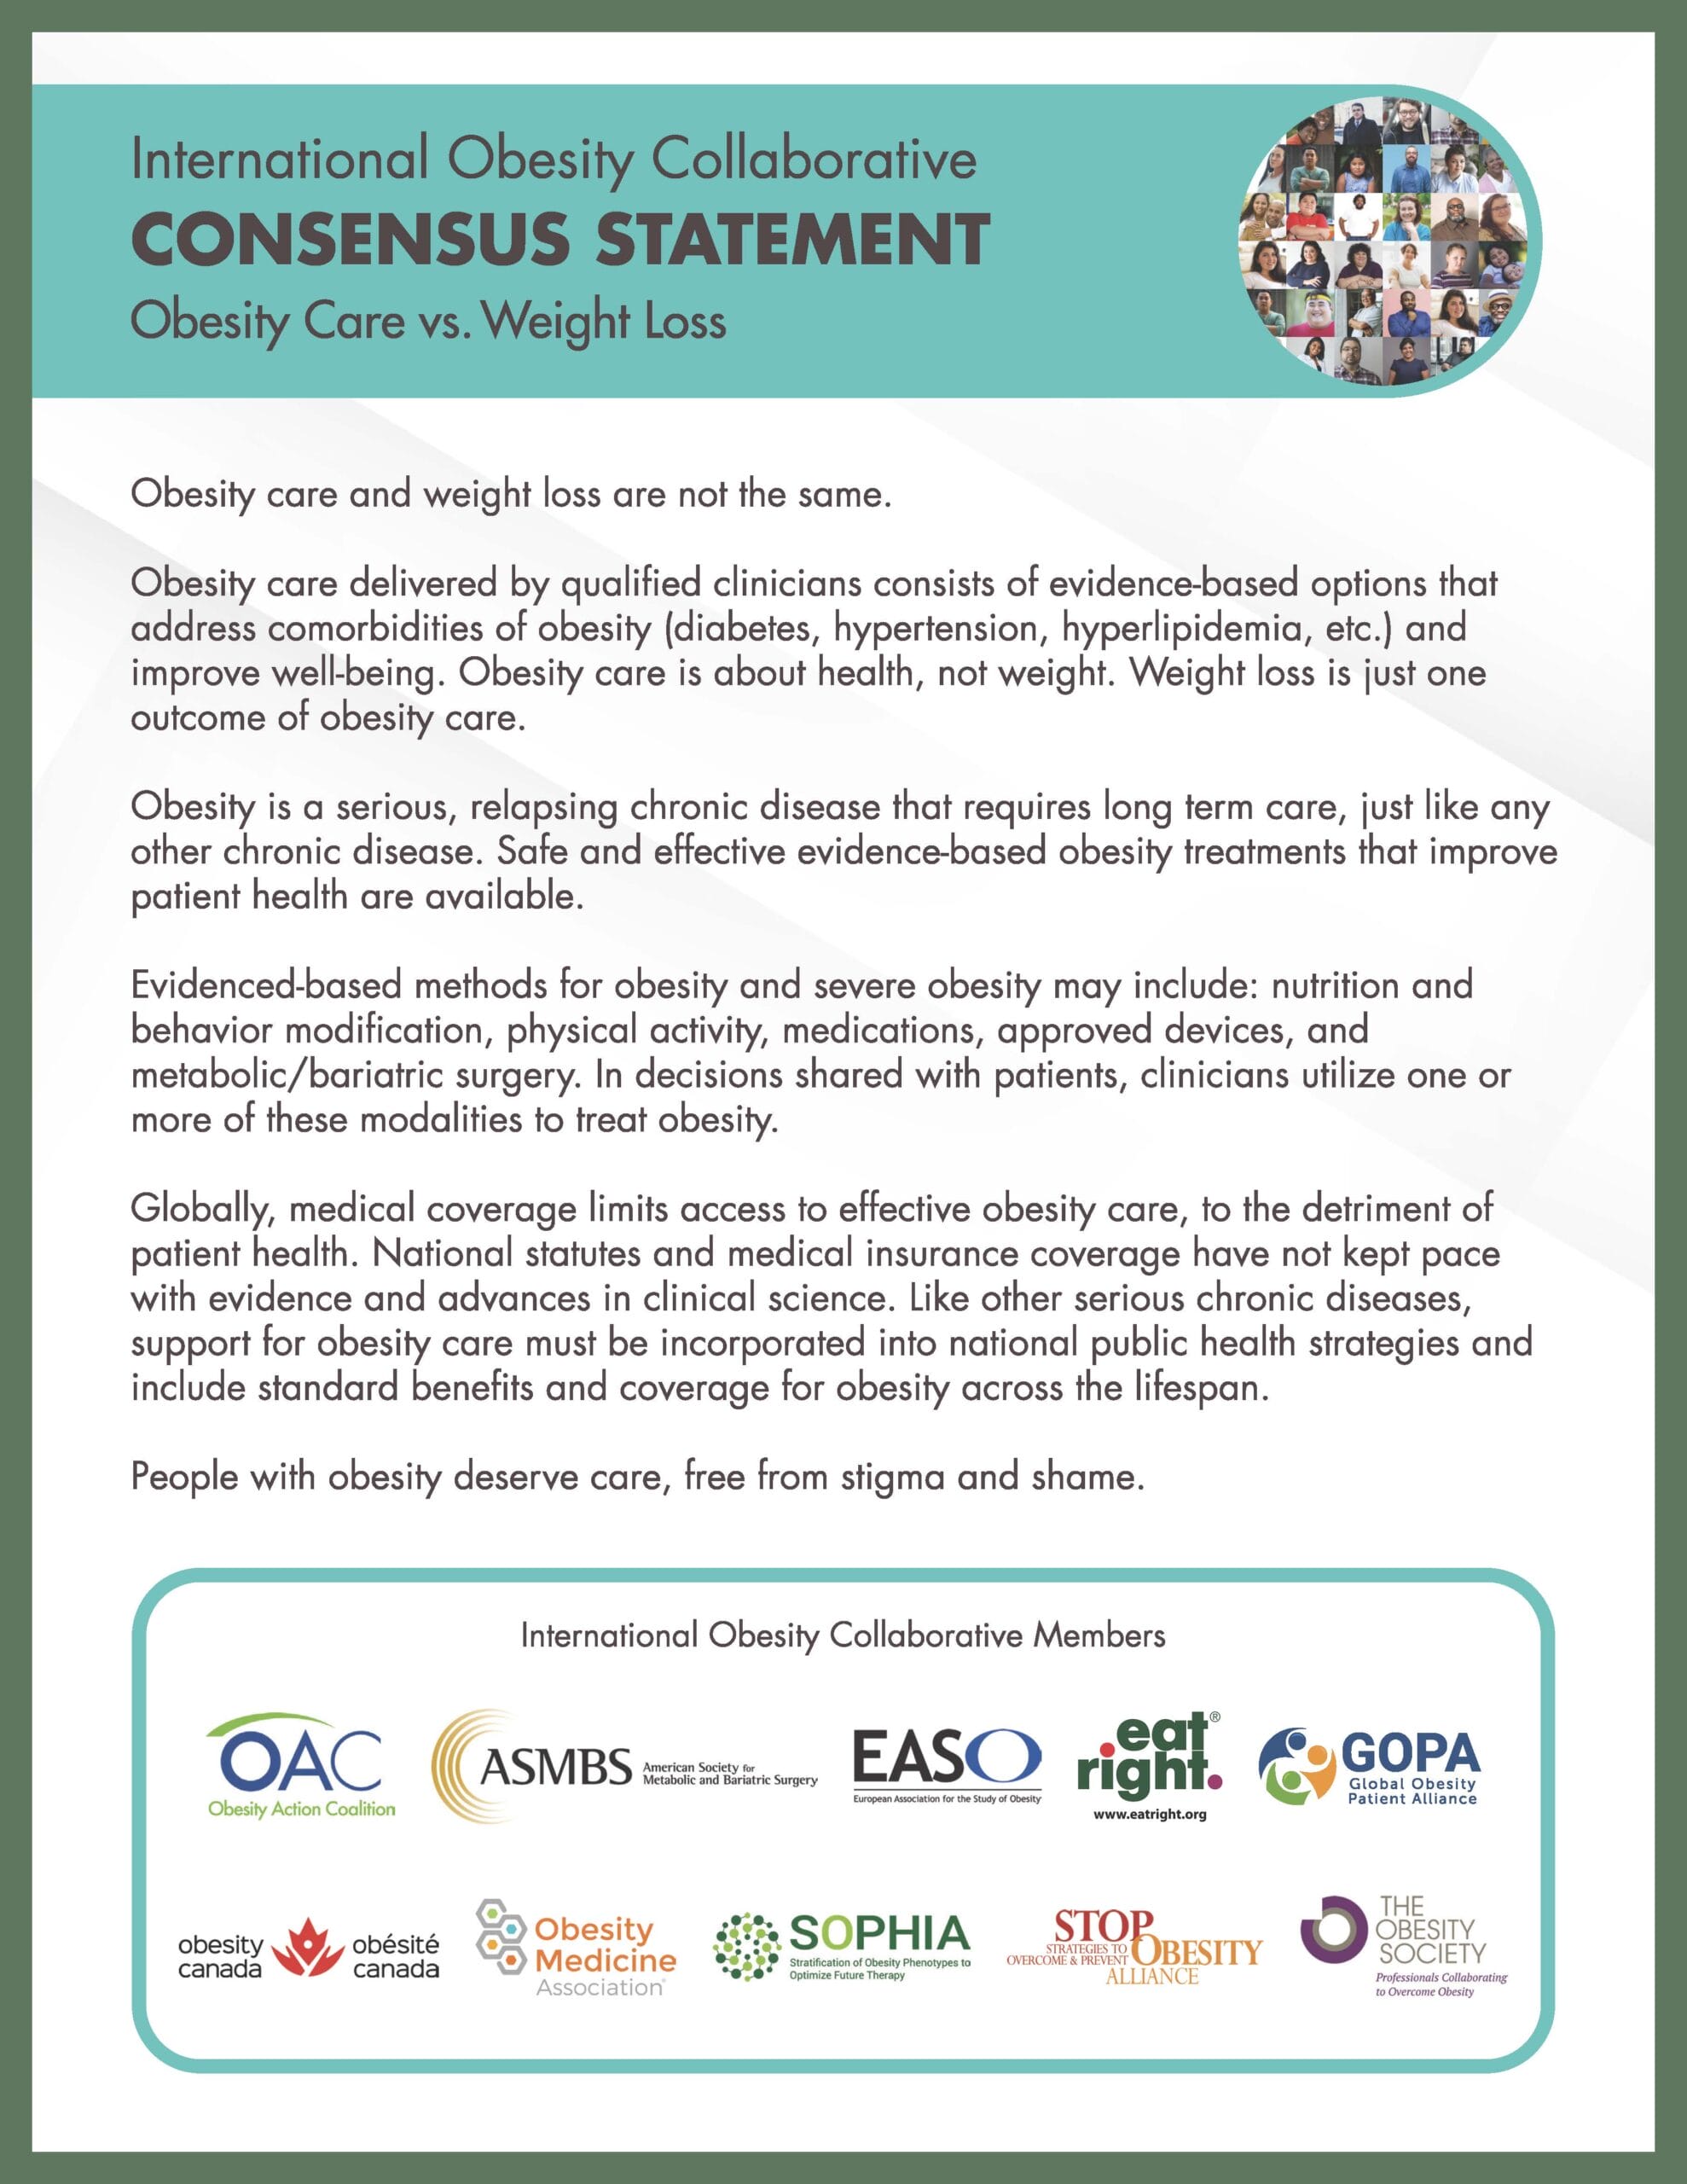 An informative poster by the international obesity collaborative highlighting evidence-based, long-term obesity care strategies and treatments.